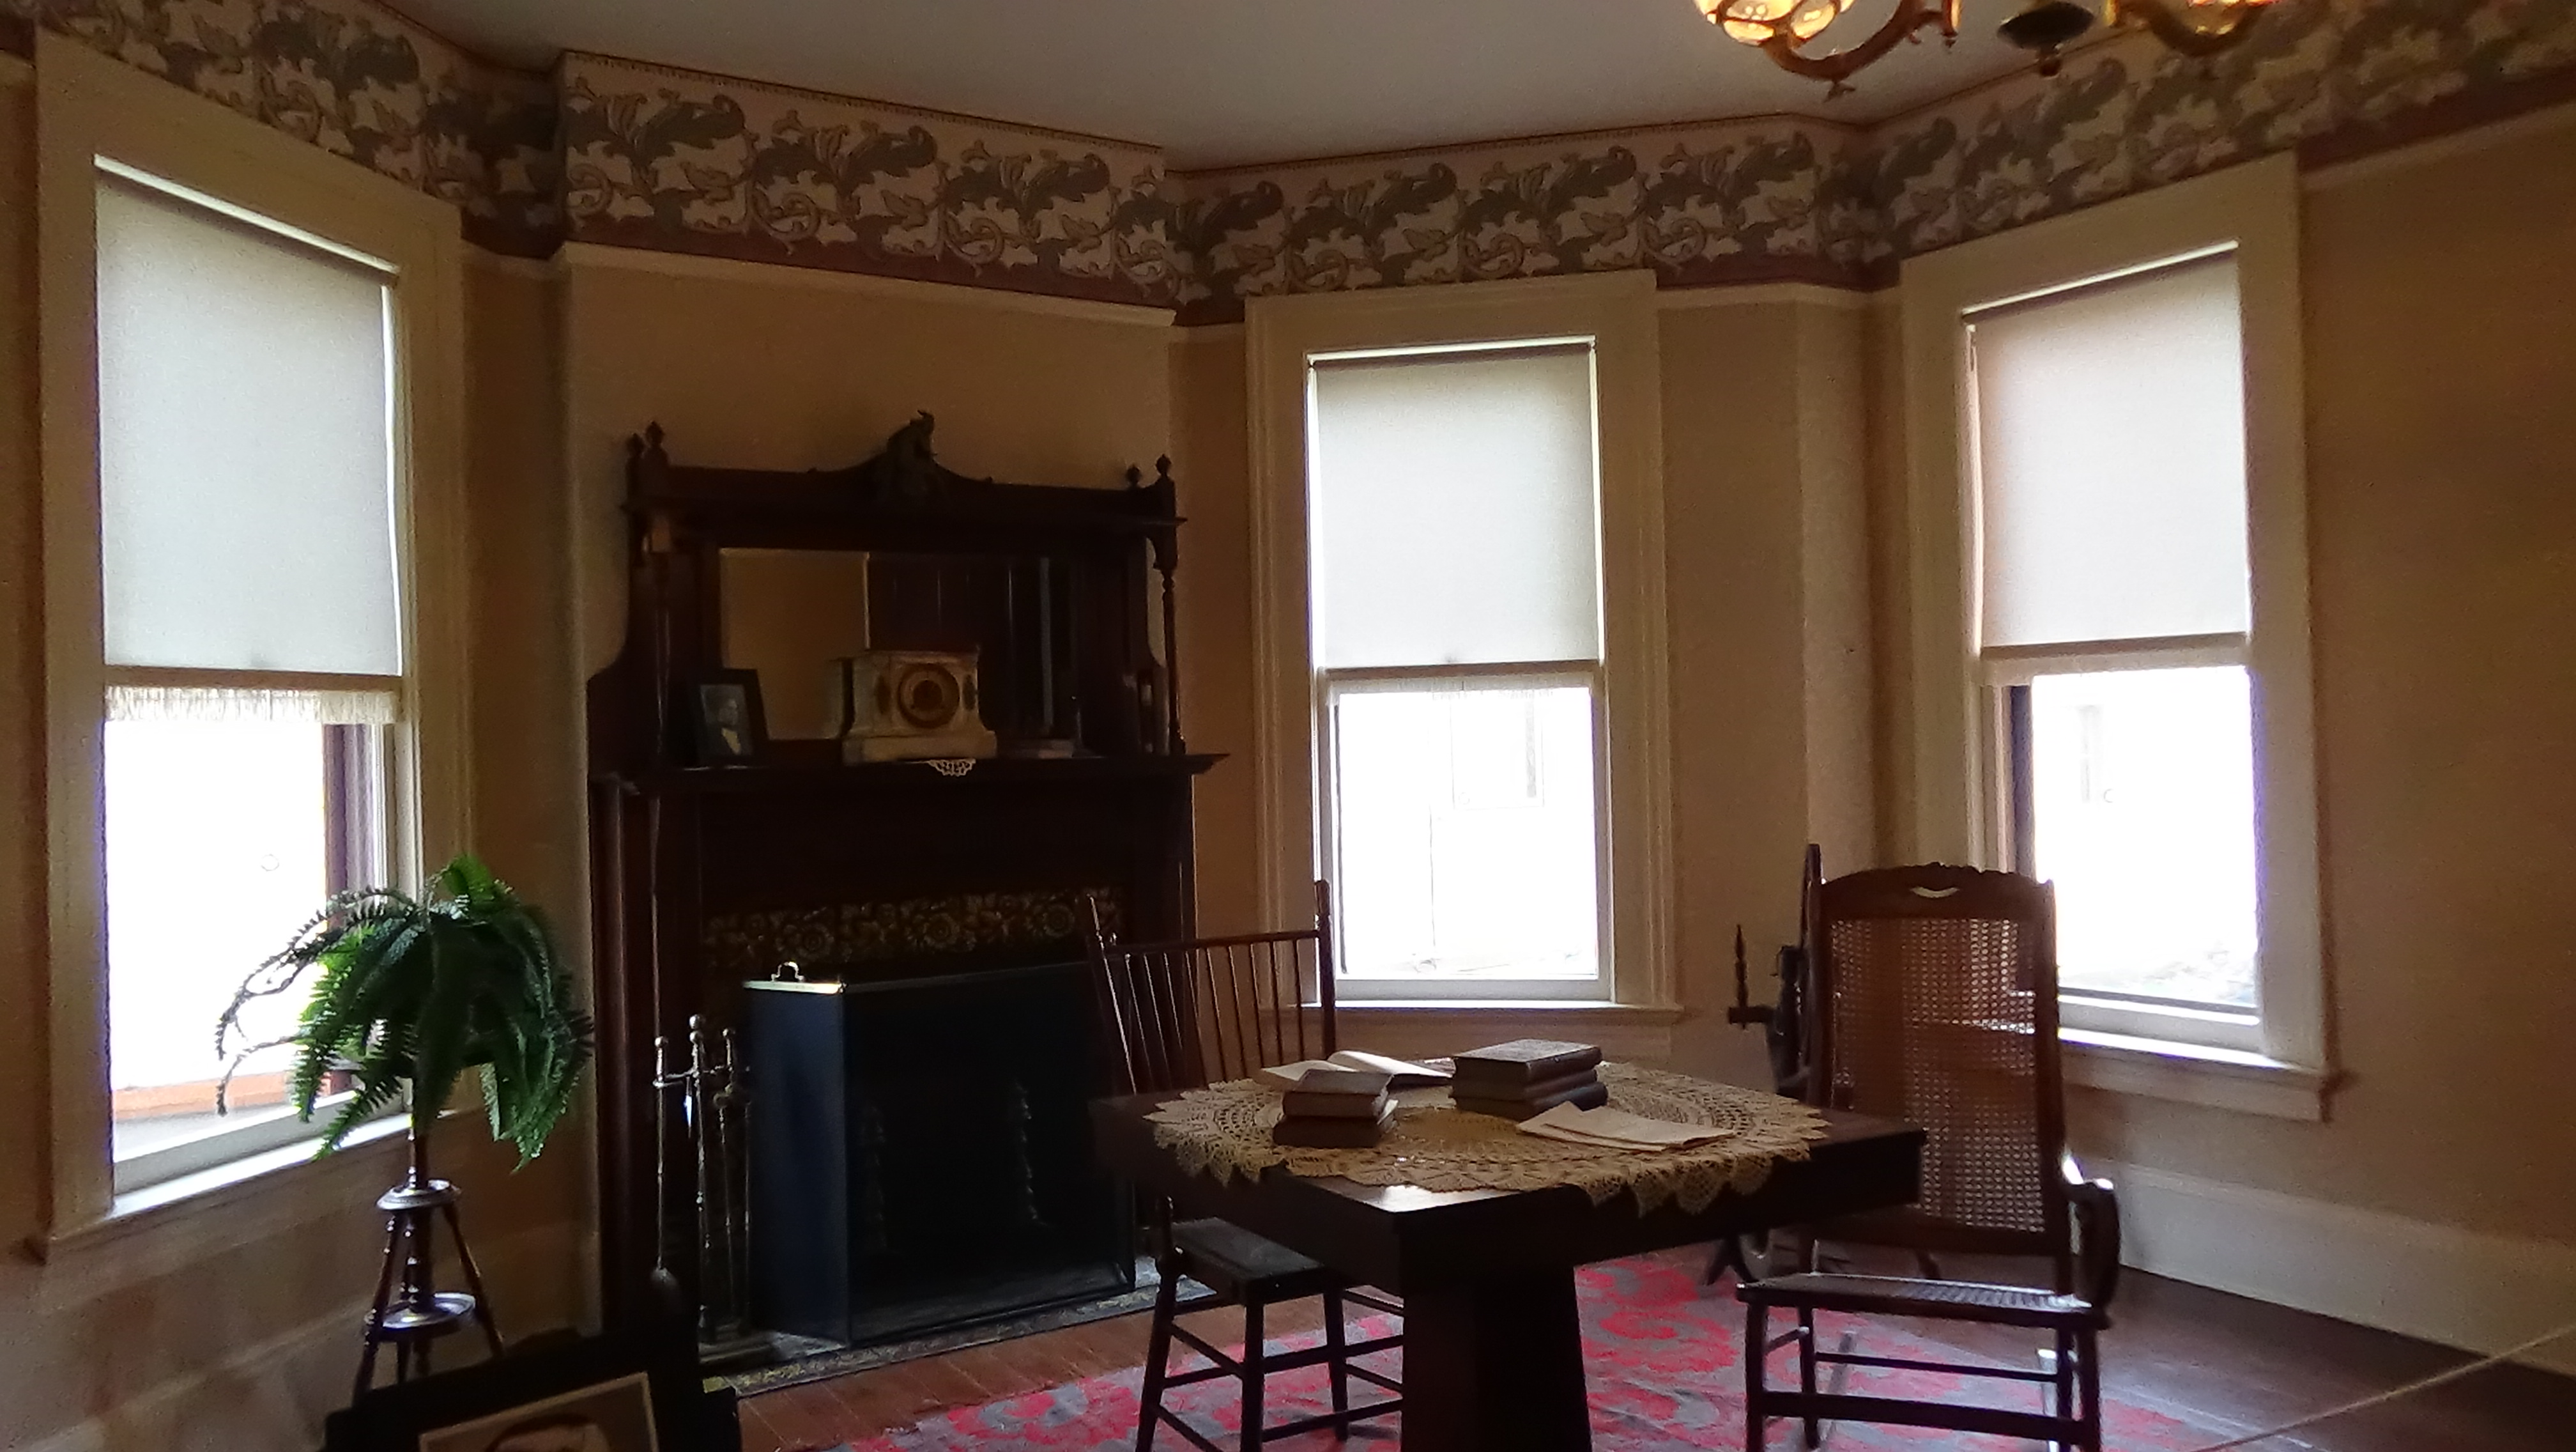 Susan B. Anthony Museum & House History